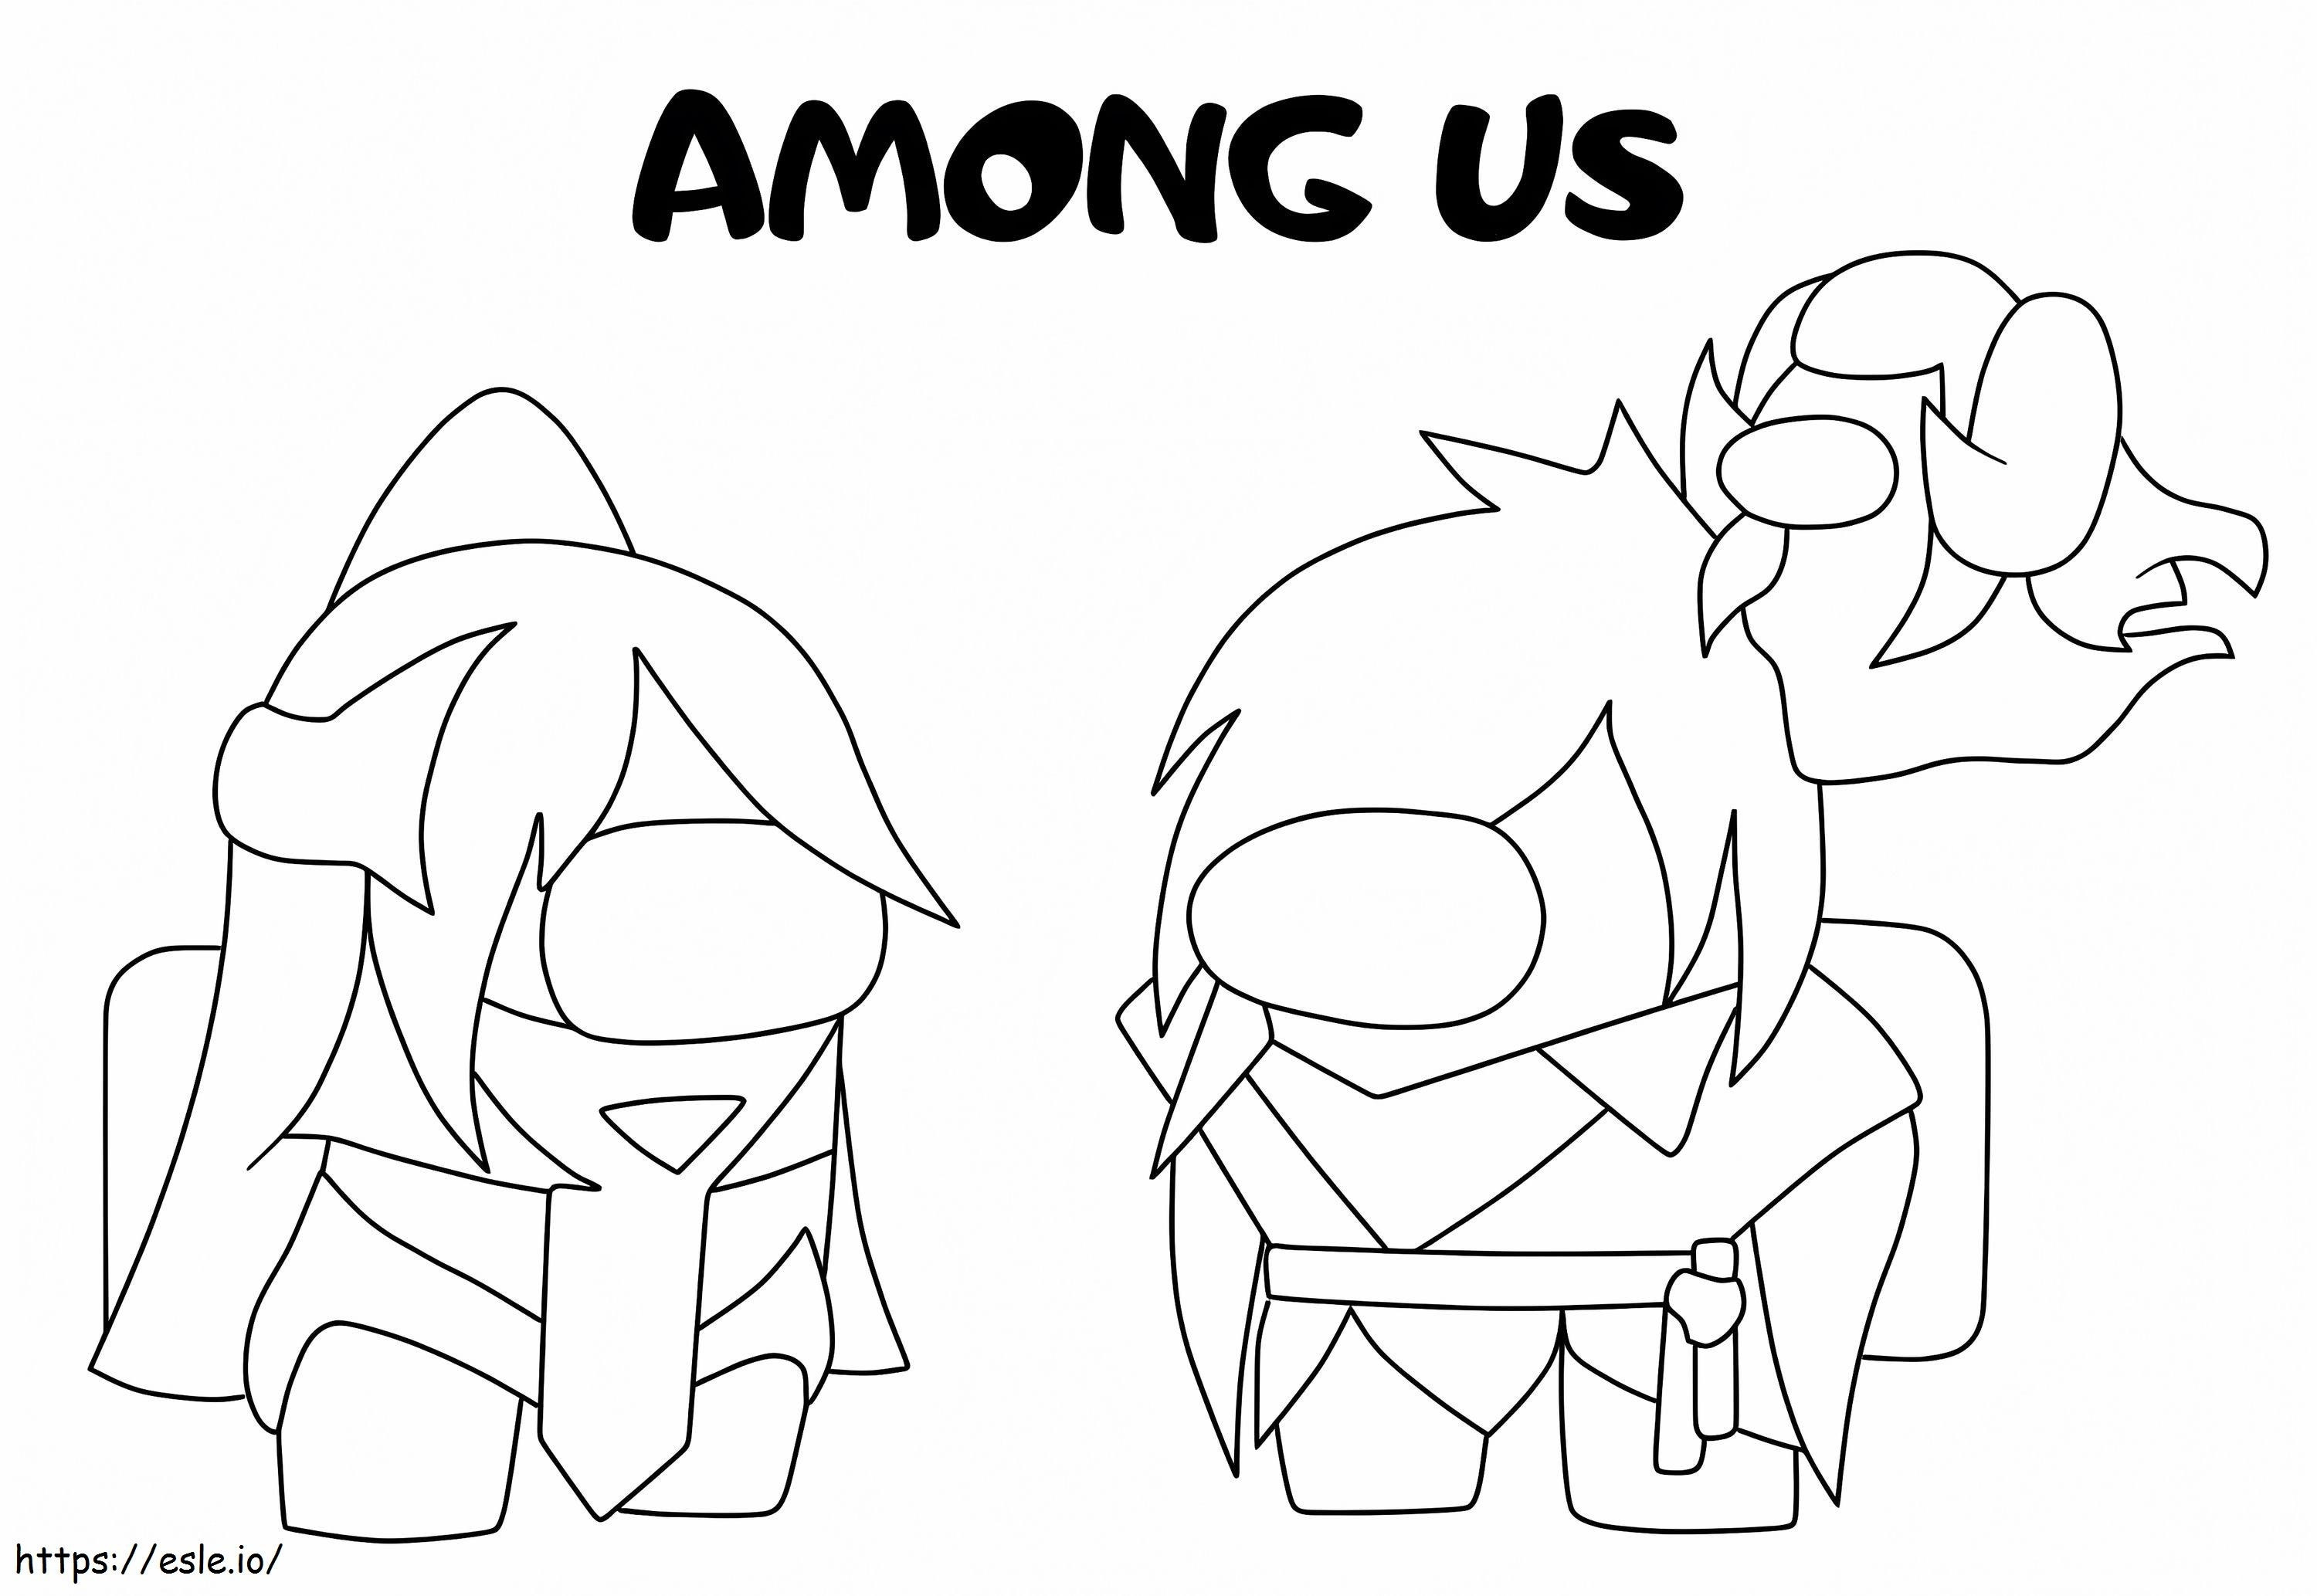 Among Us 25 coloring page